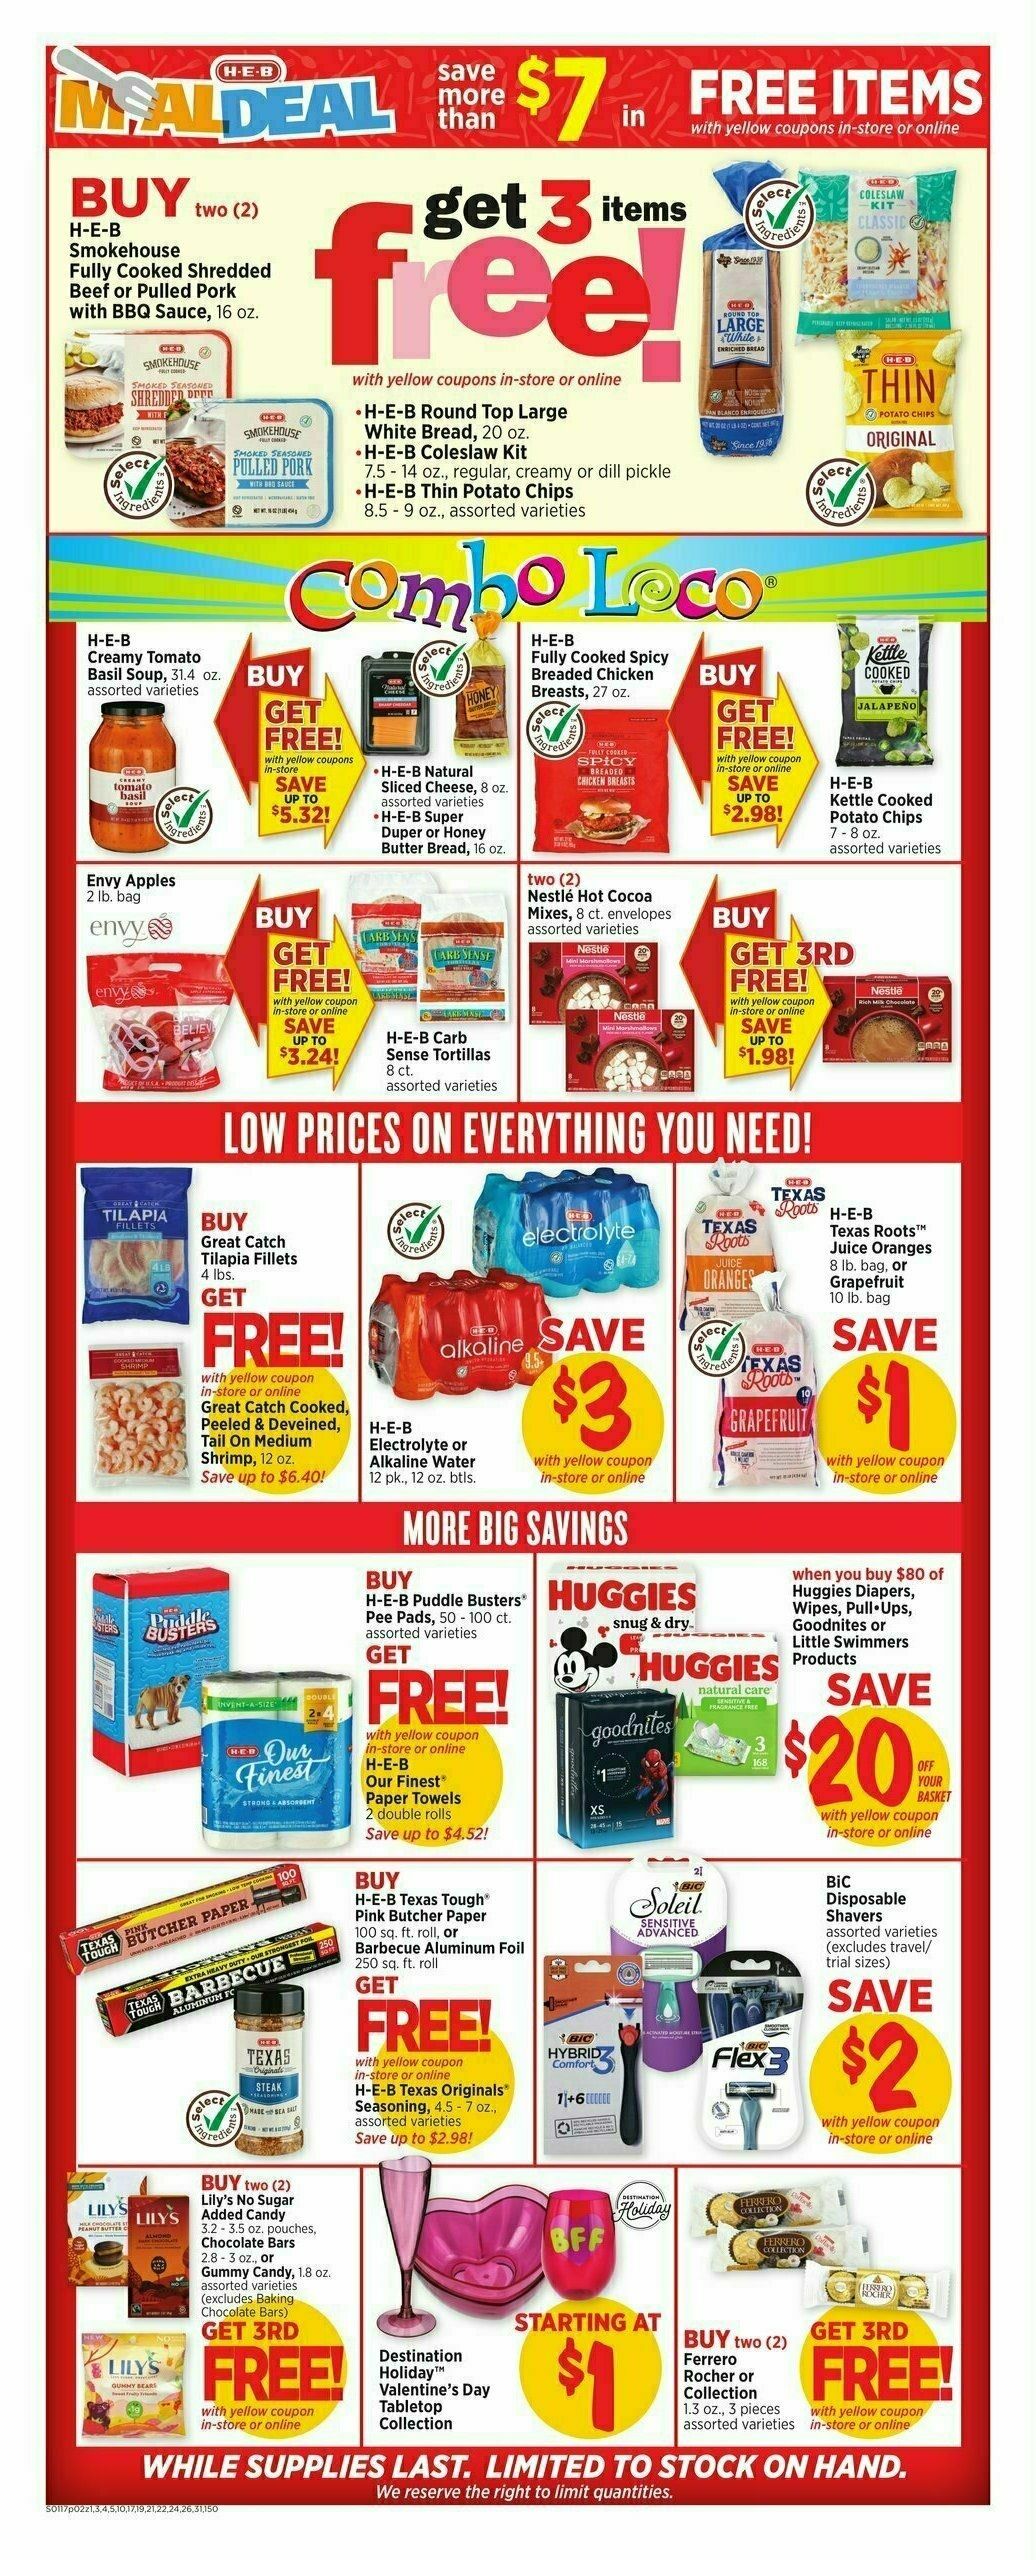 H-E-B Weekly Ad from January 17